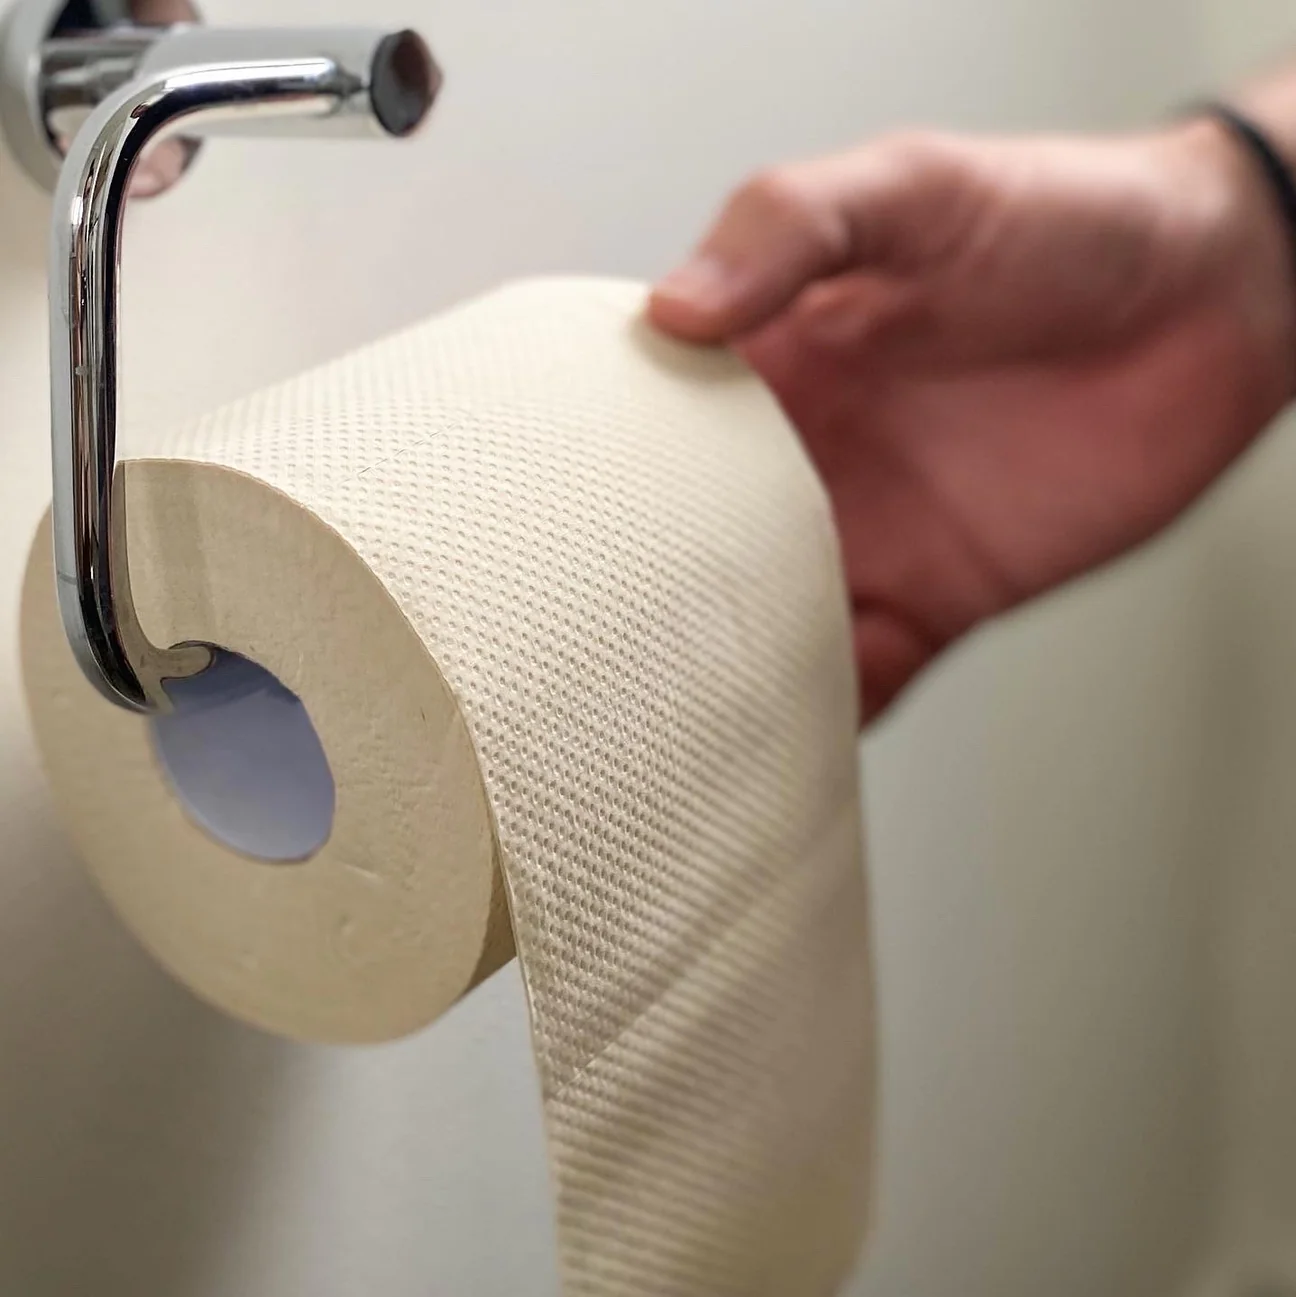 Eco Cheeks - Wrapped Toilet Paper